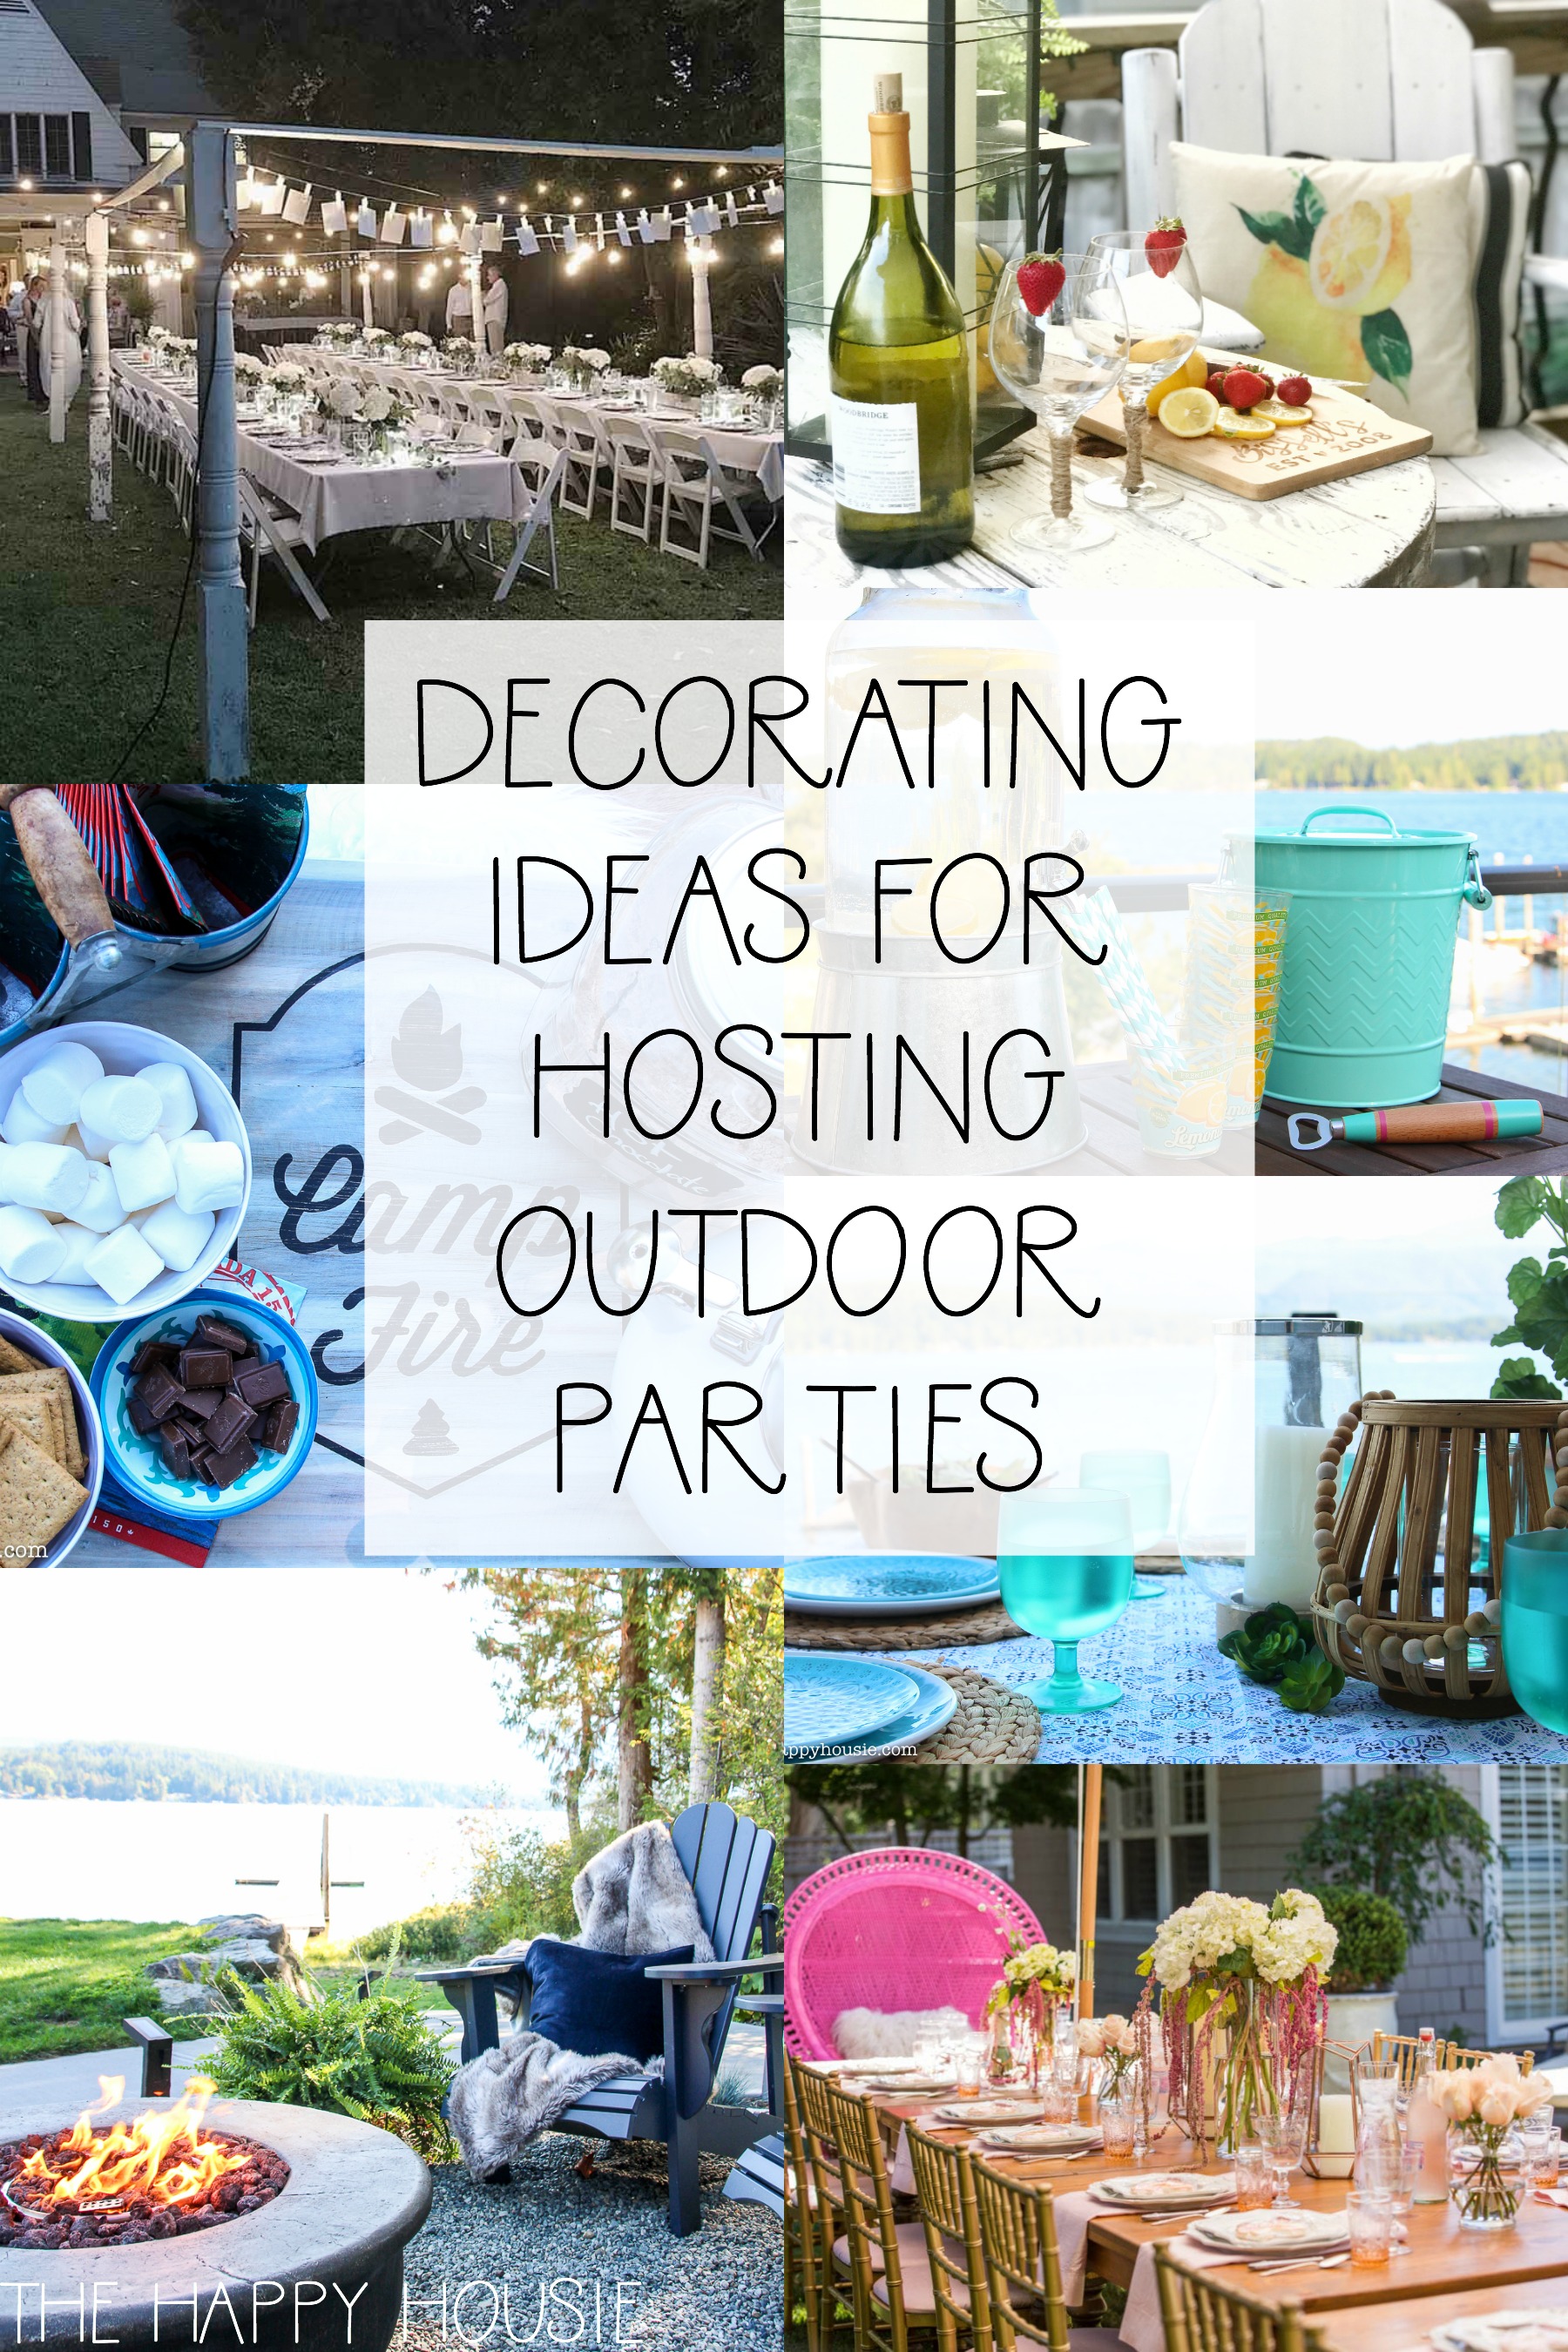 Decorating ideas poster.